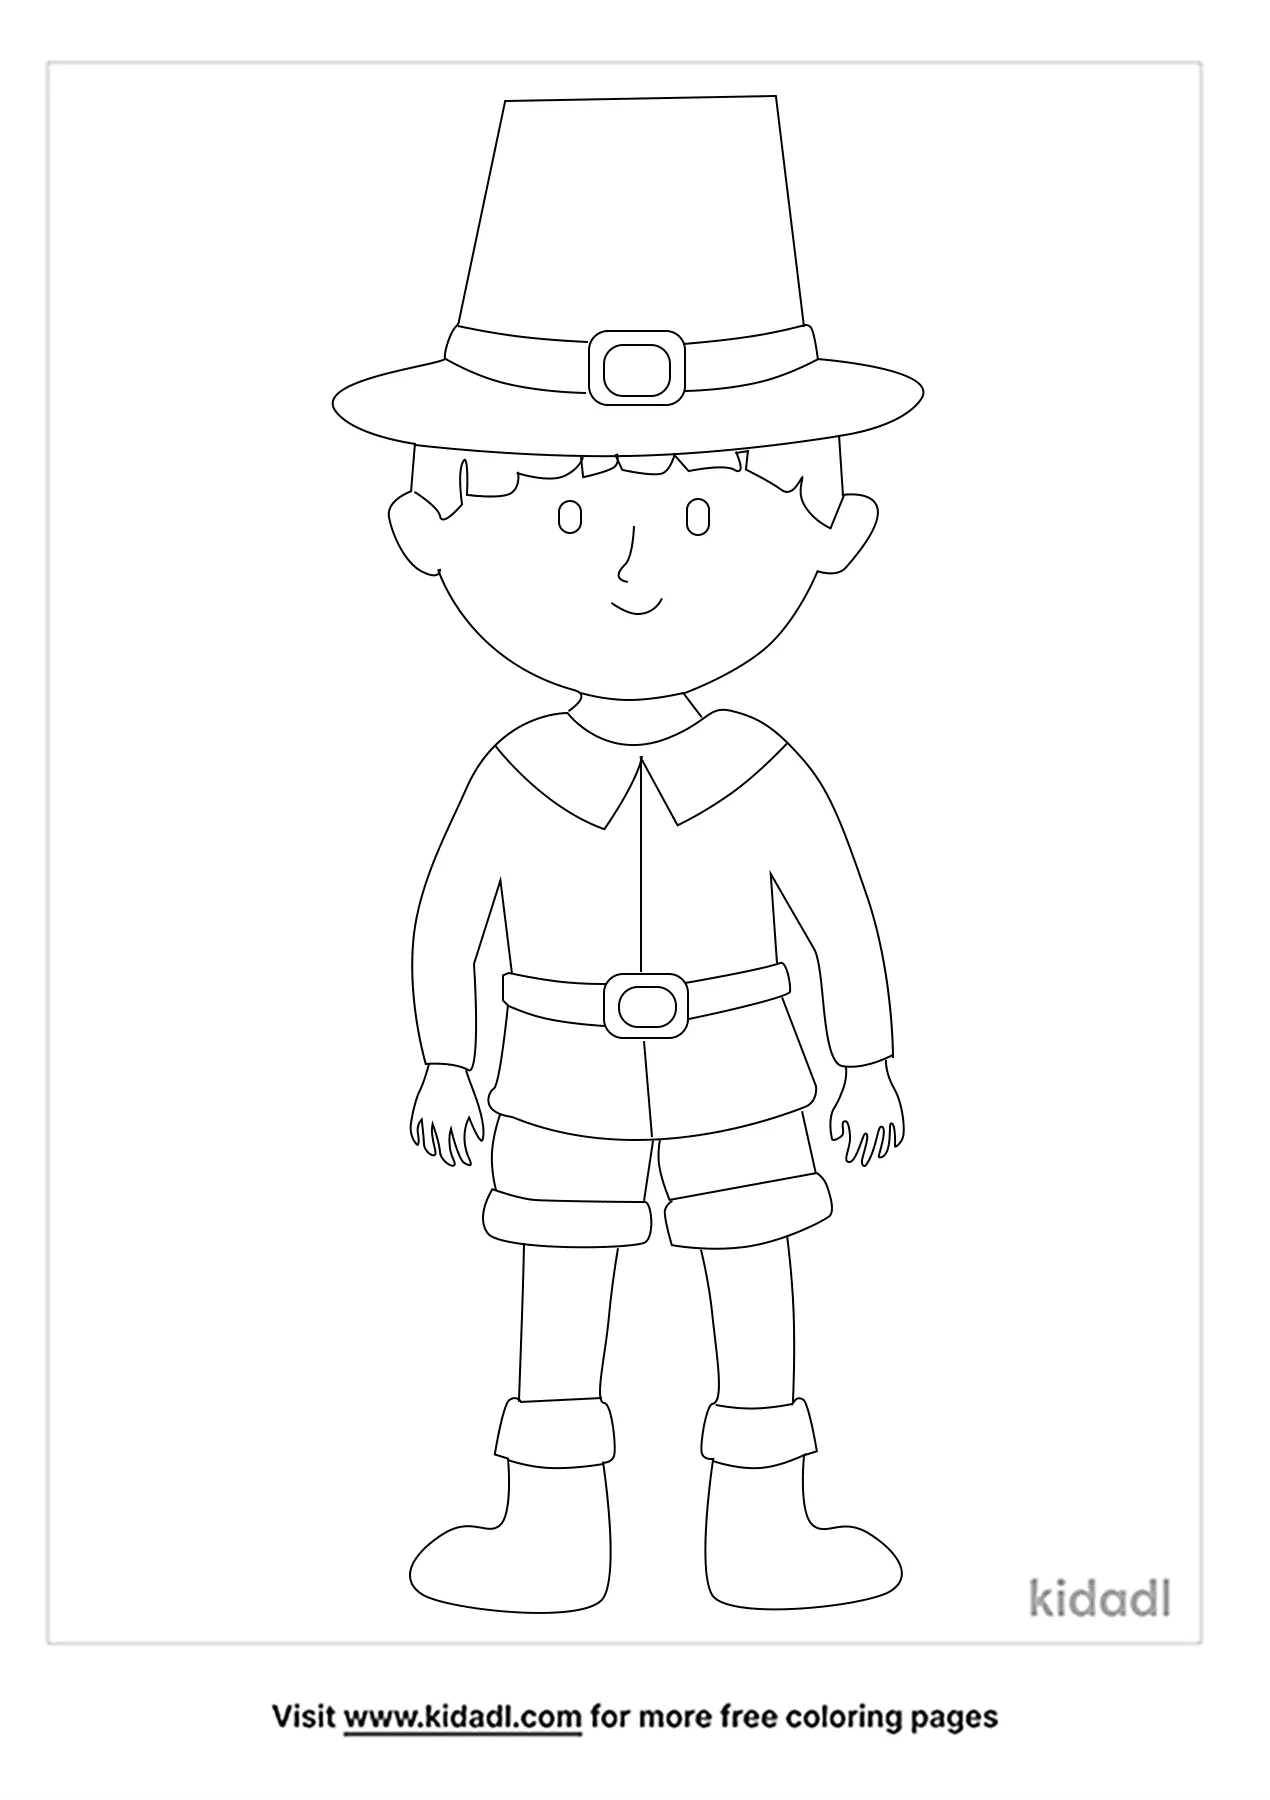 Pilgrim Boy Coloring Pages   Free People and celebrities Coloring ...